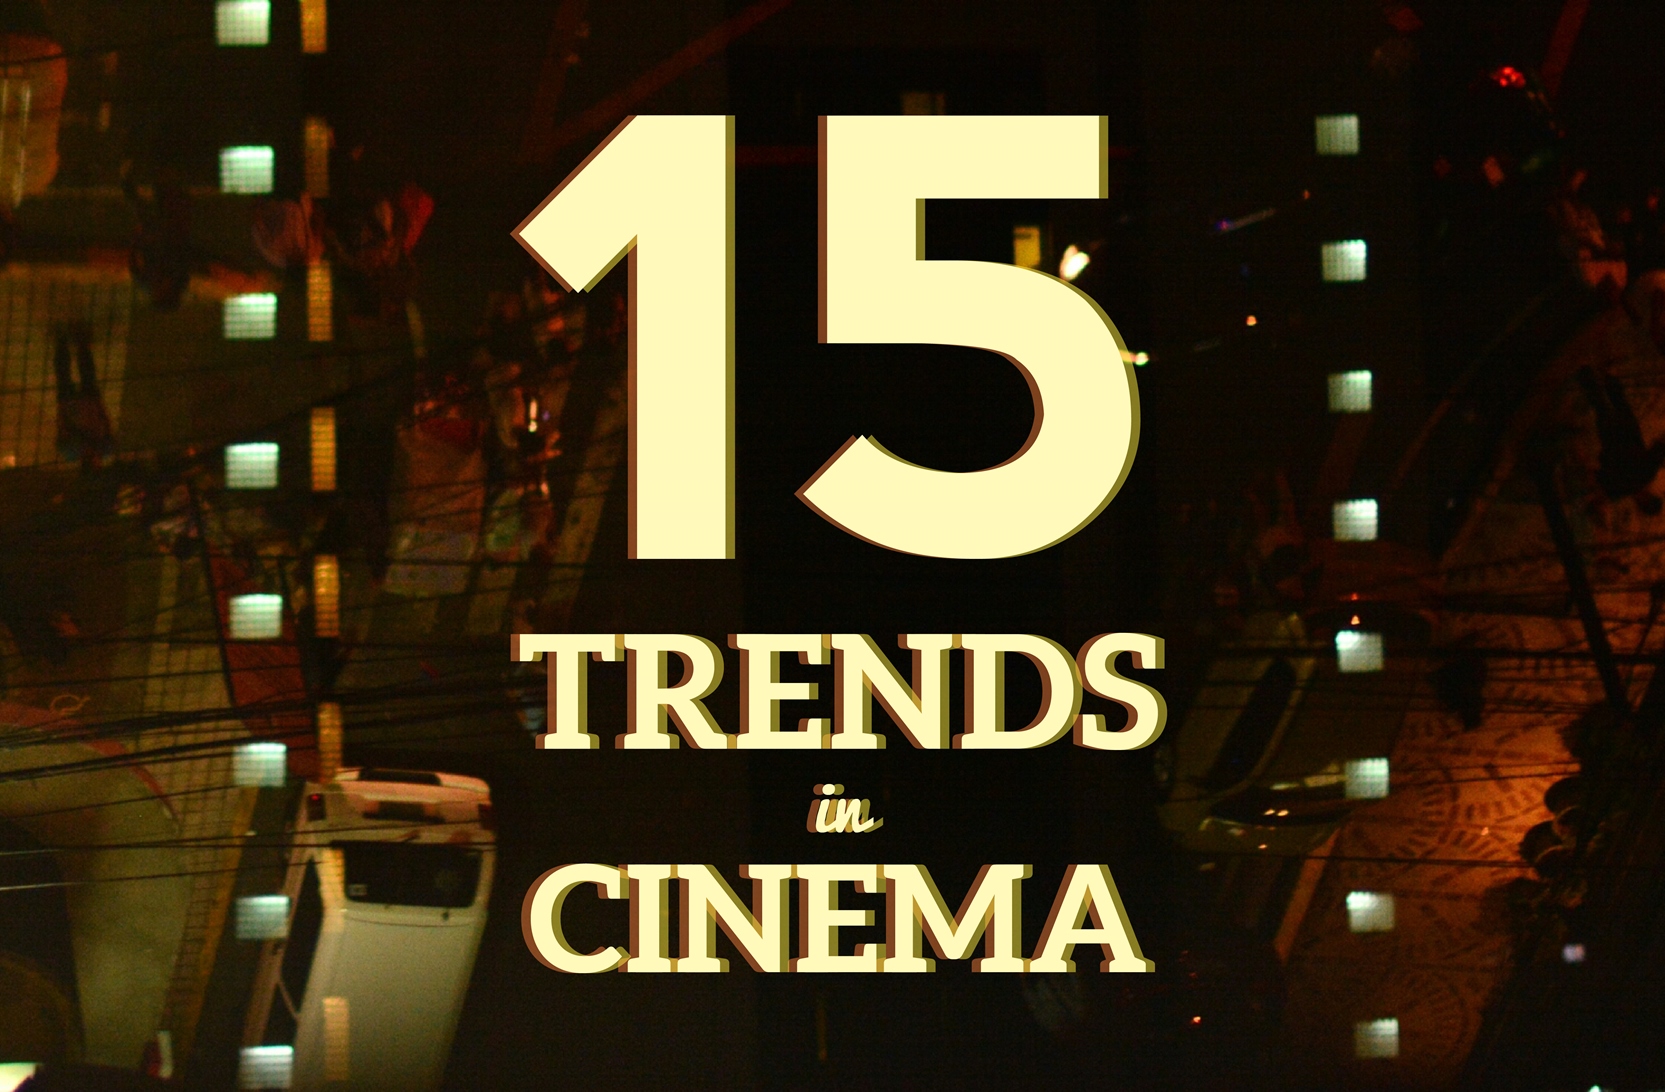 What’s Next: 15 Trends in Cinema